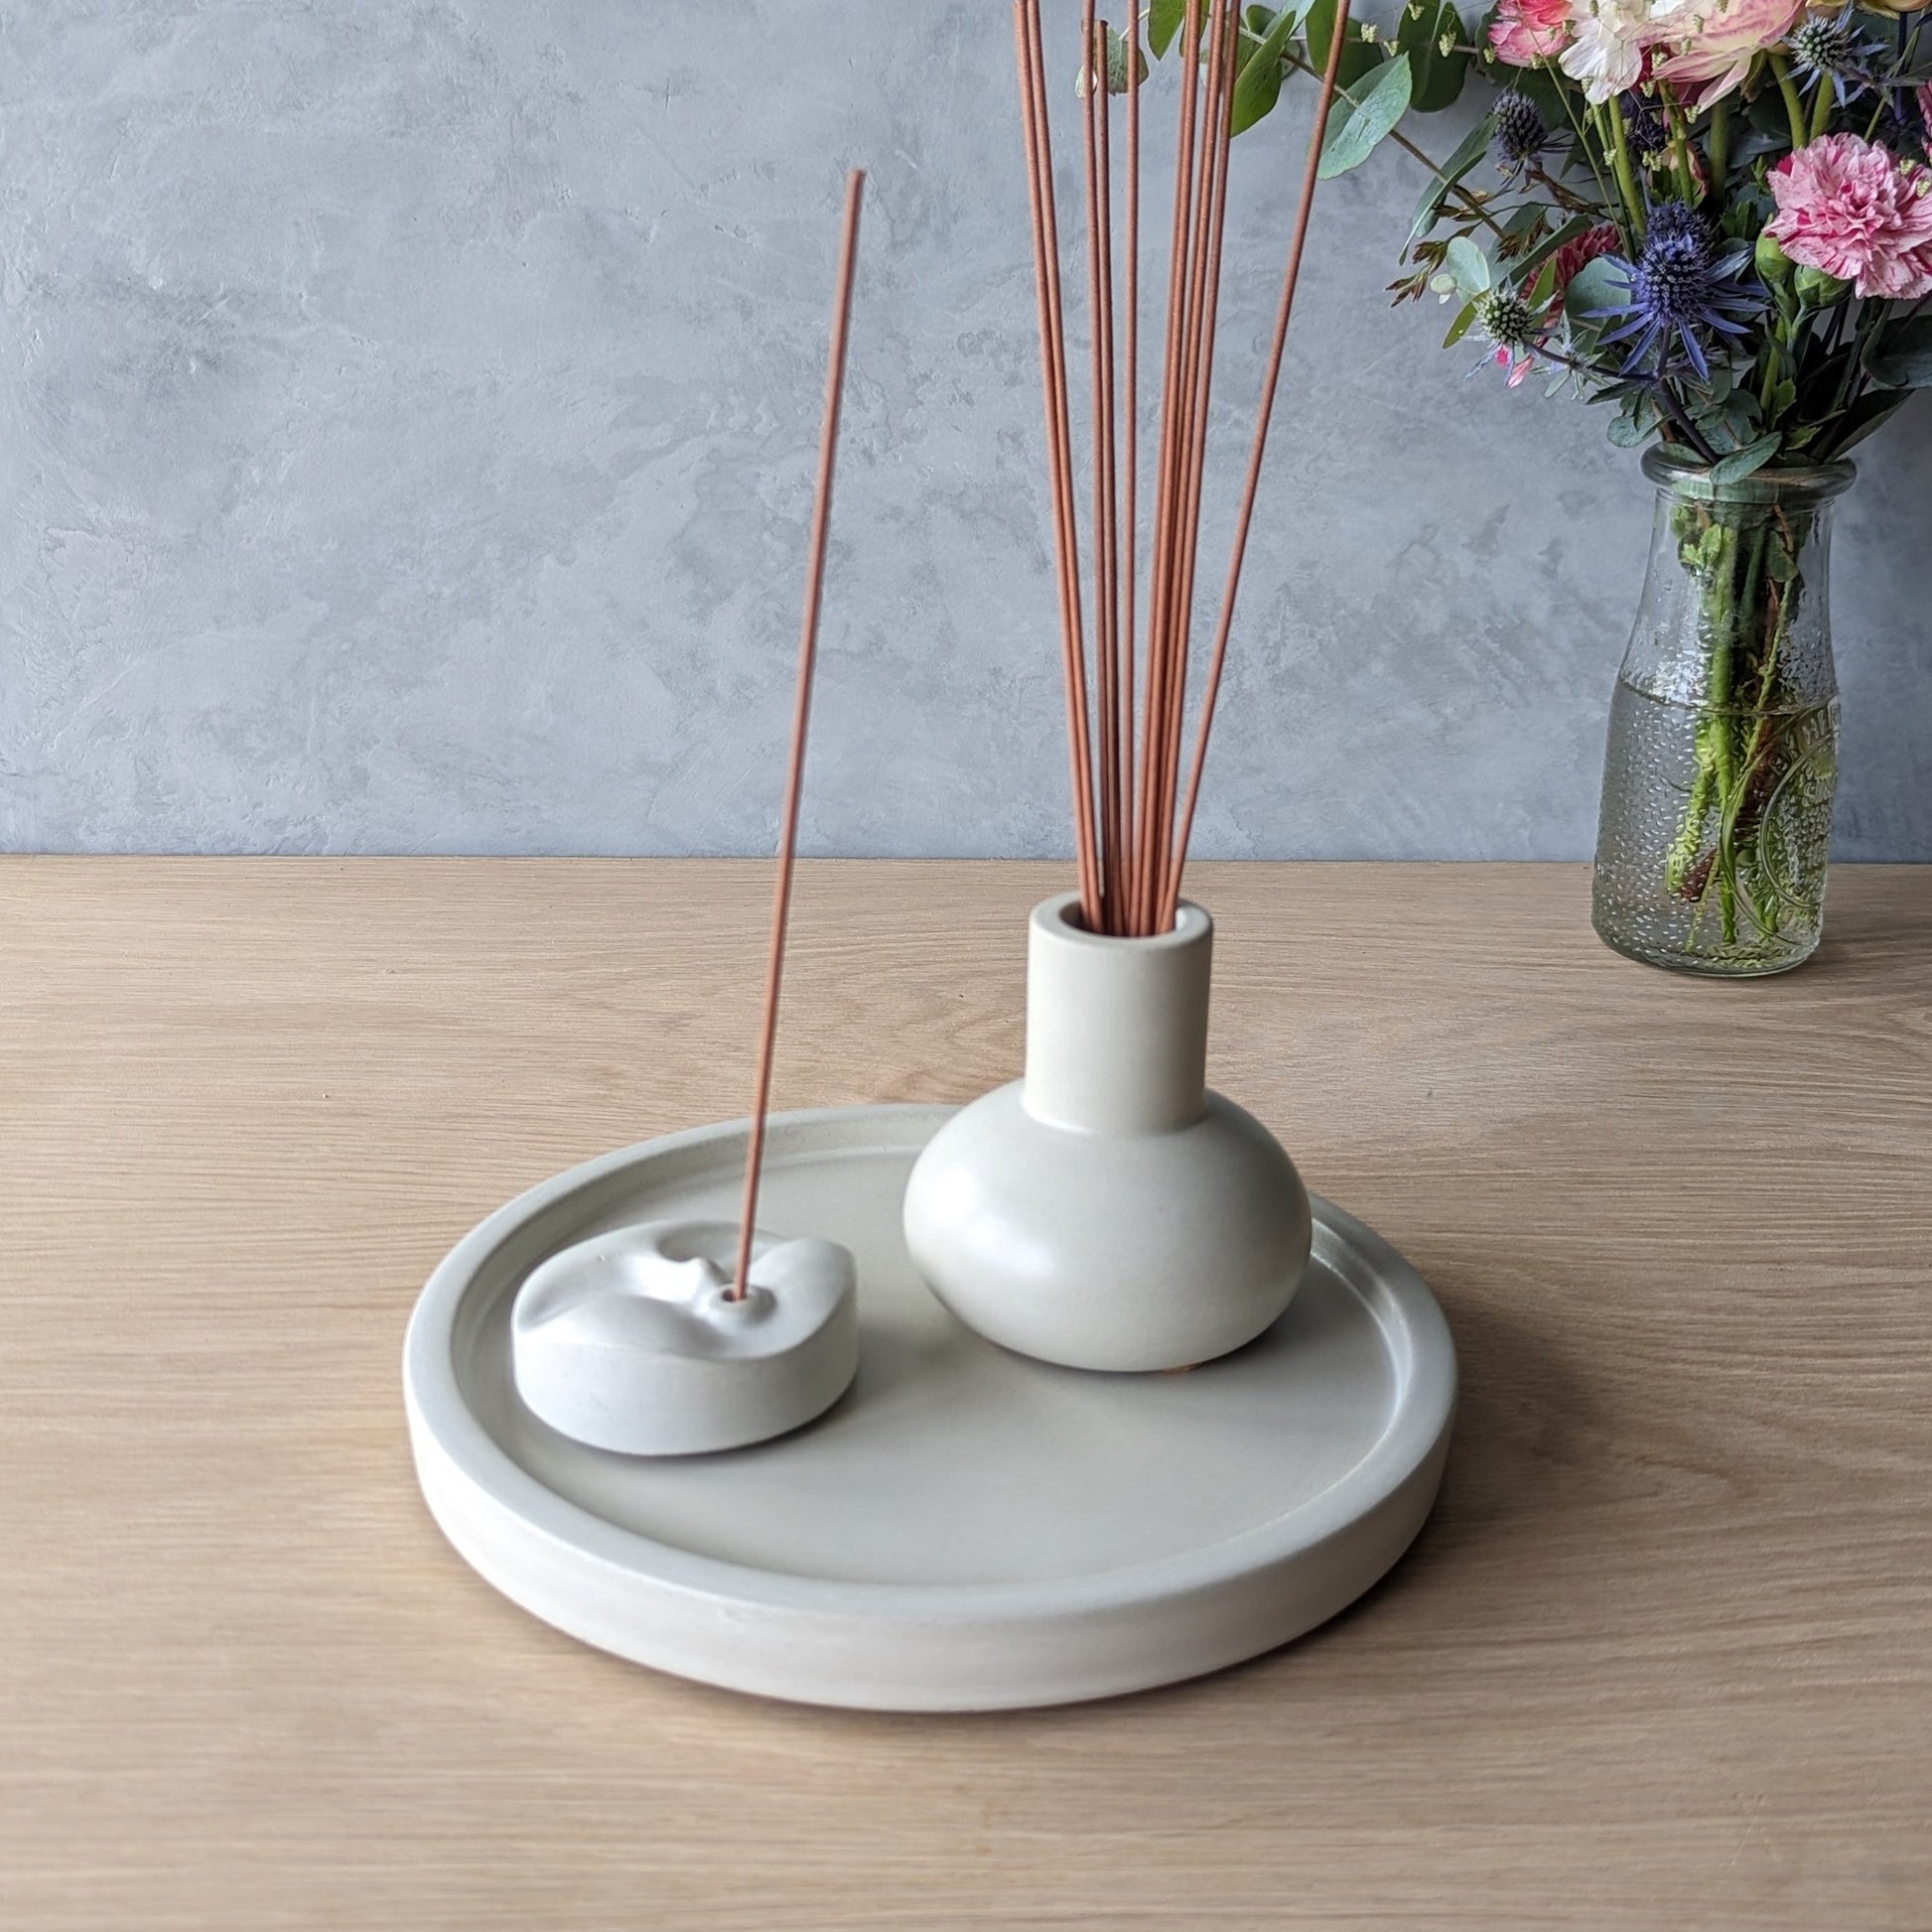 Concrete Incense Burner Set with Holder and Tray